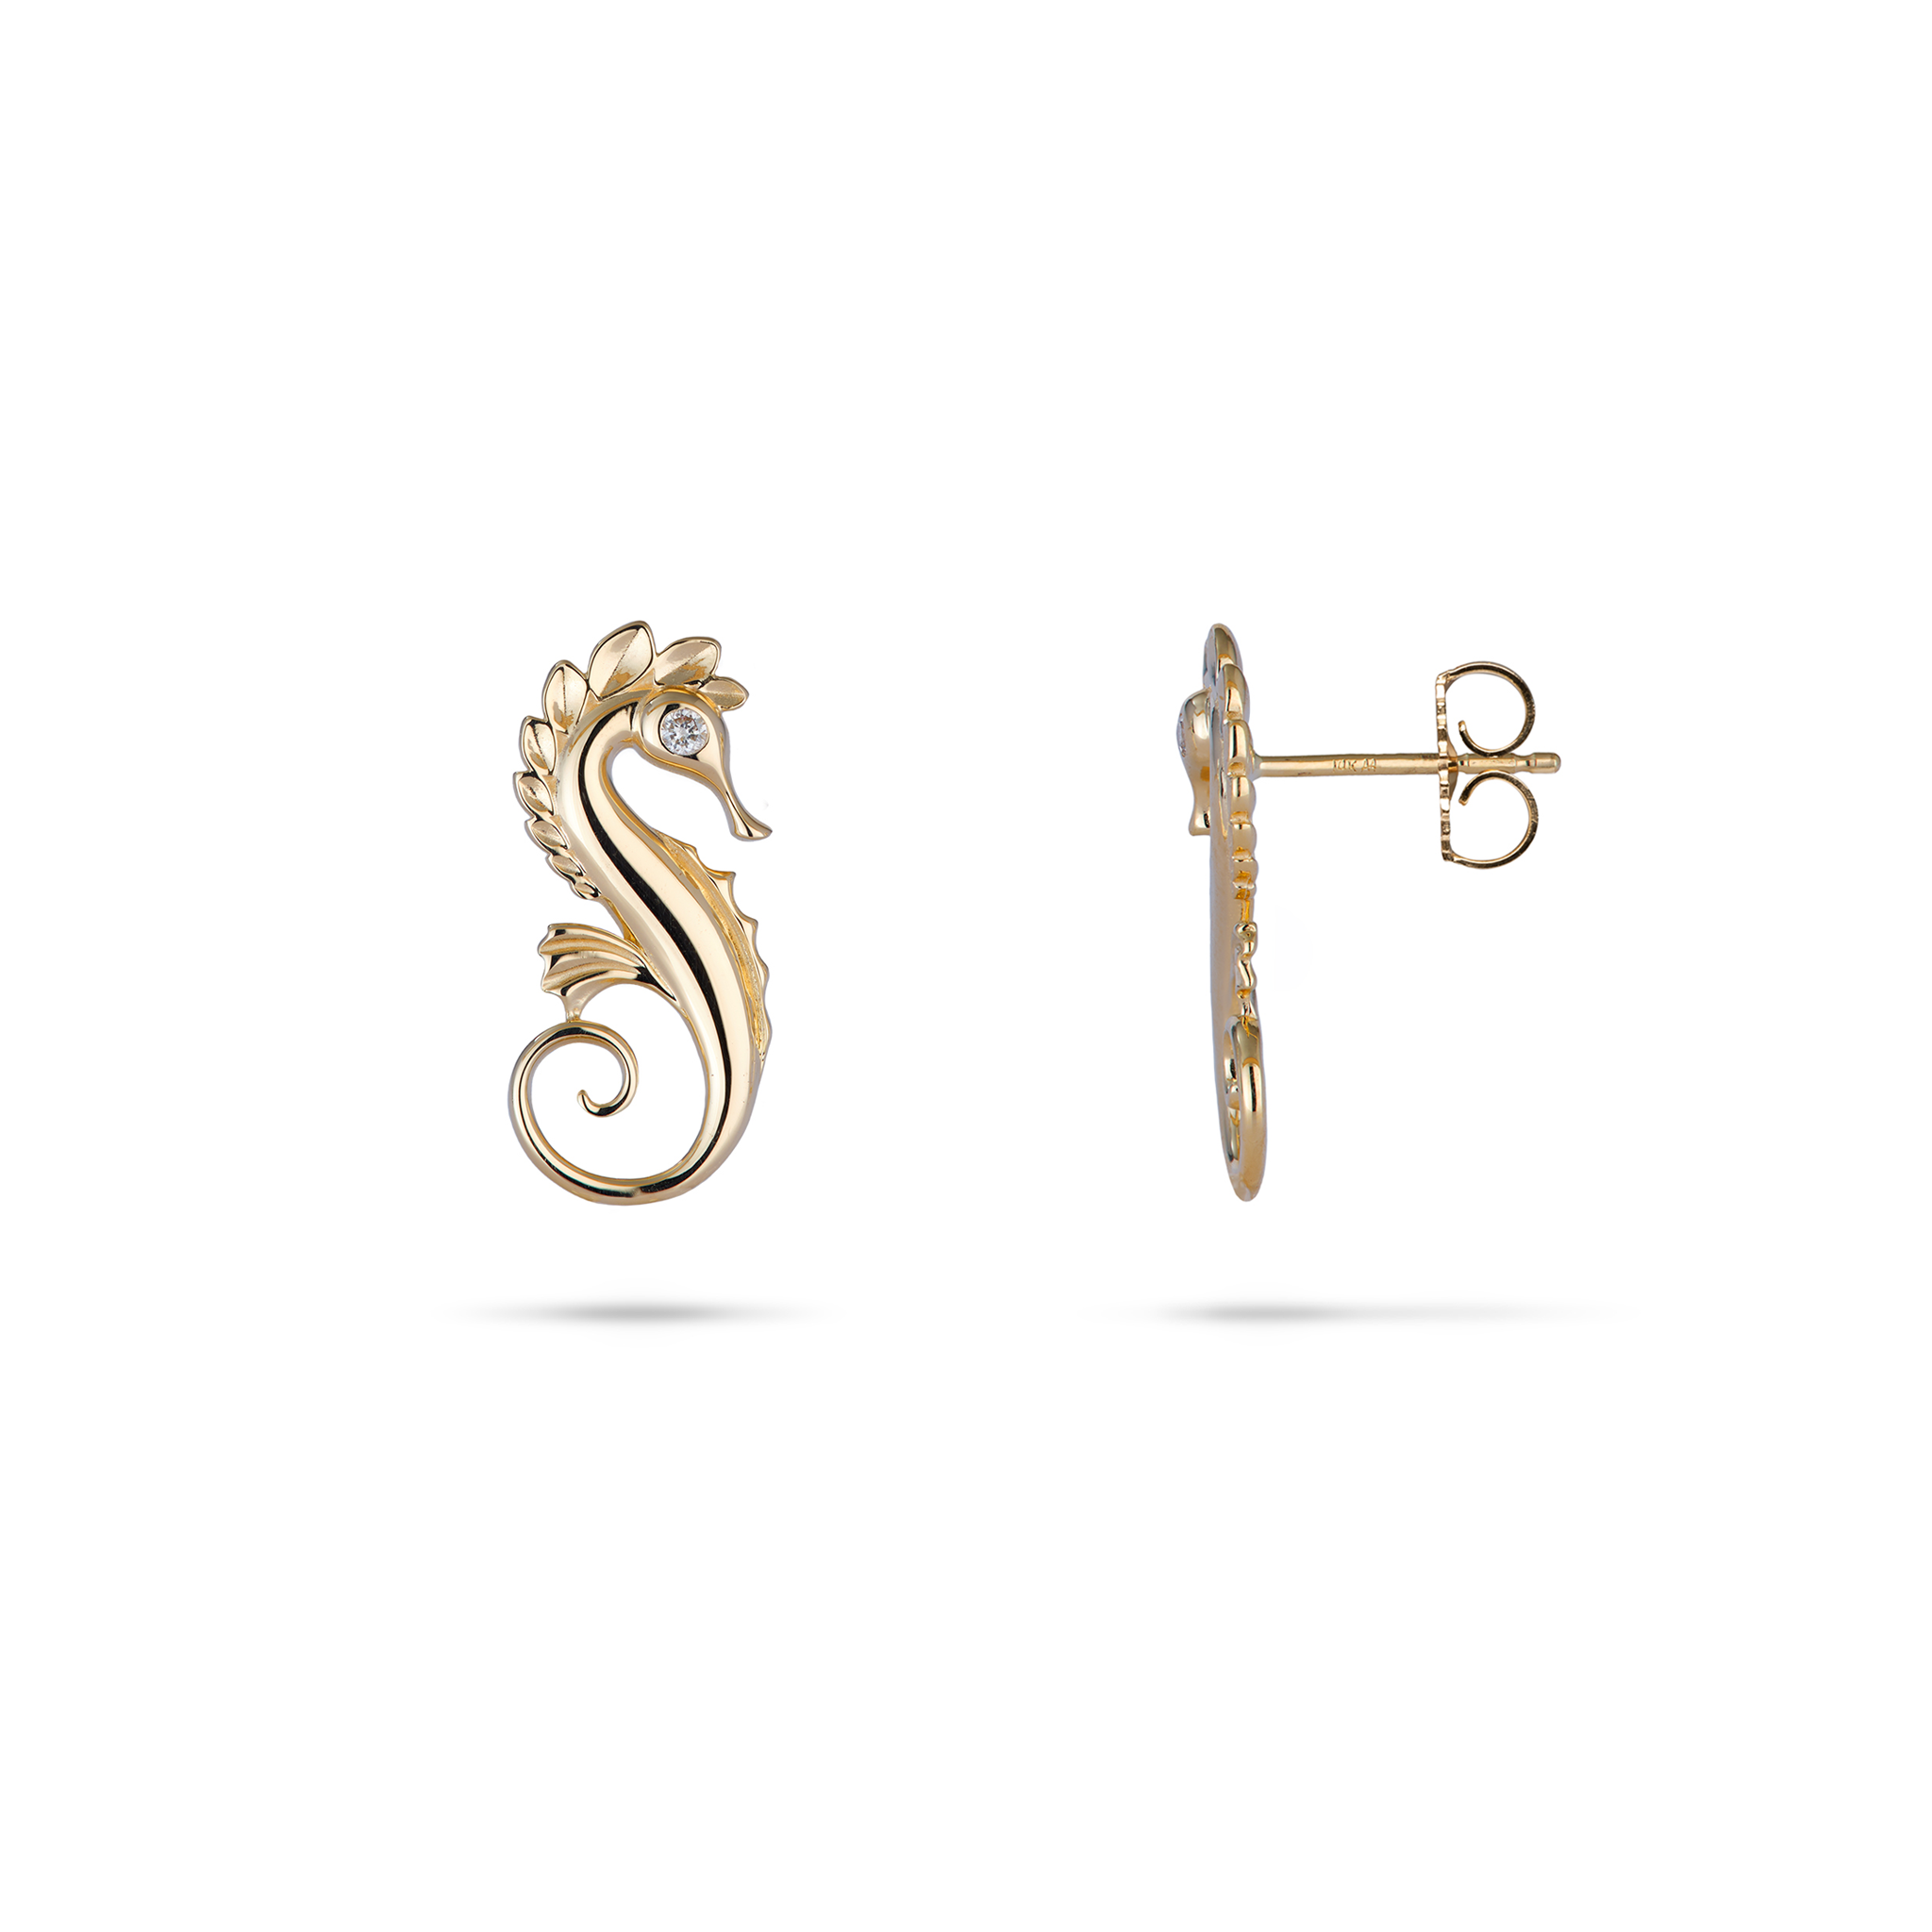 Ocean Dance Seahorse Earrings in Gold with Diamonds - 20mm- Made in Hawaii